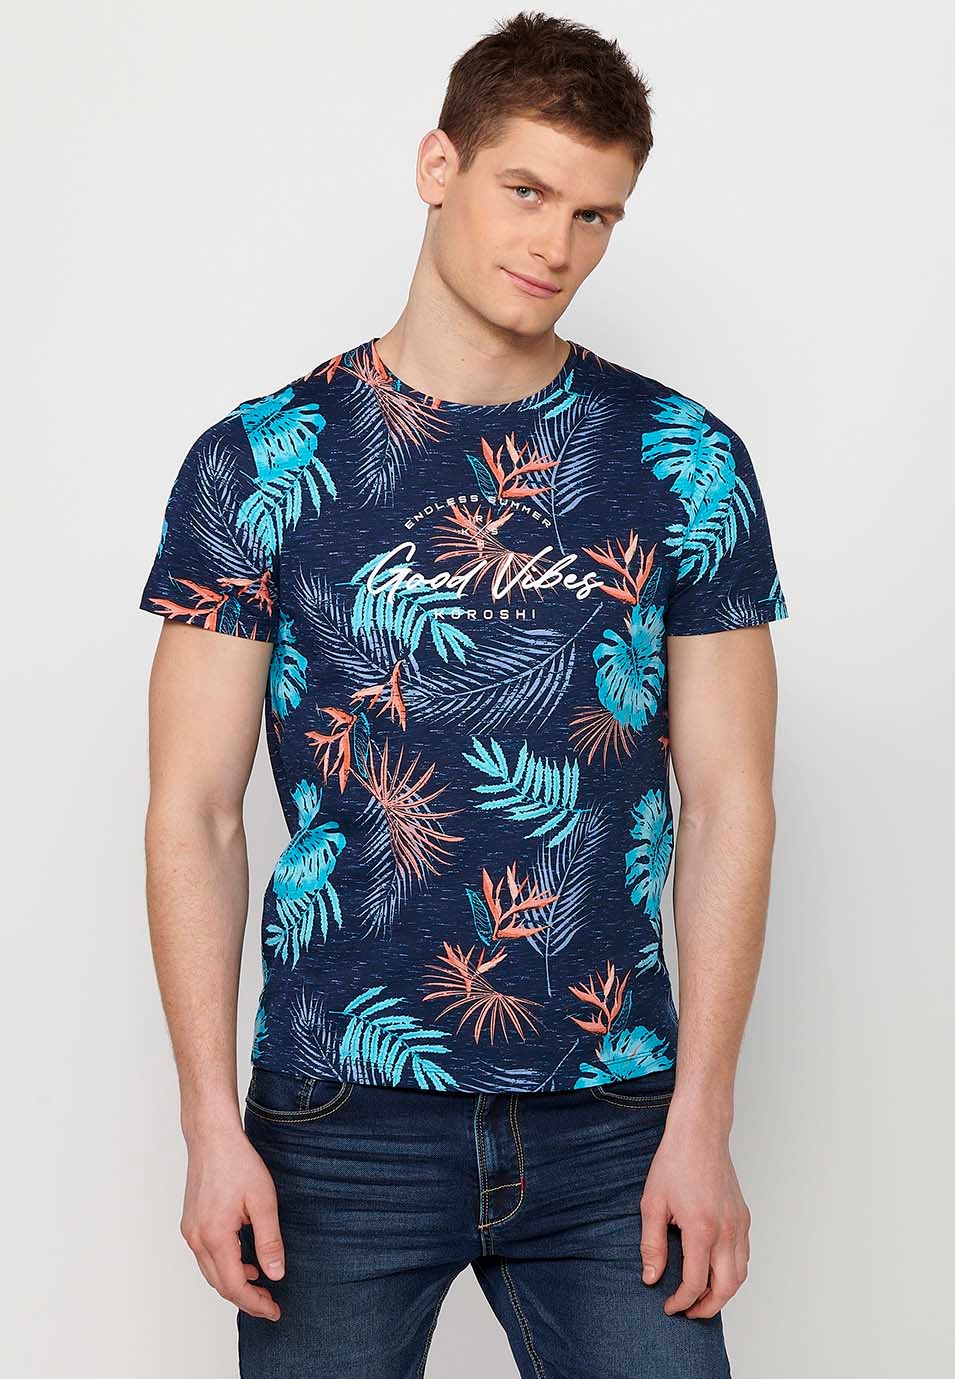 Short-sleeved cotton t-shirt with multicolored navy tropical print for men